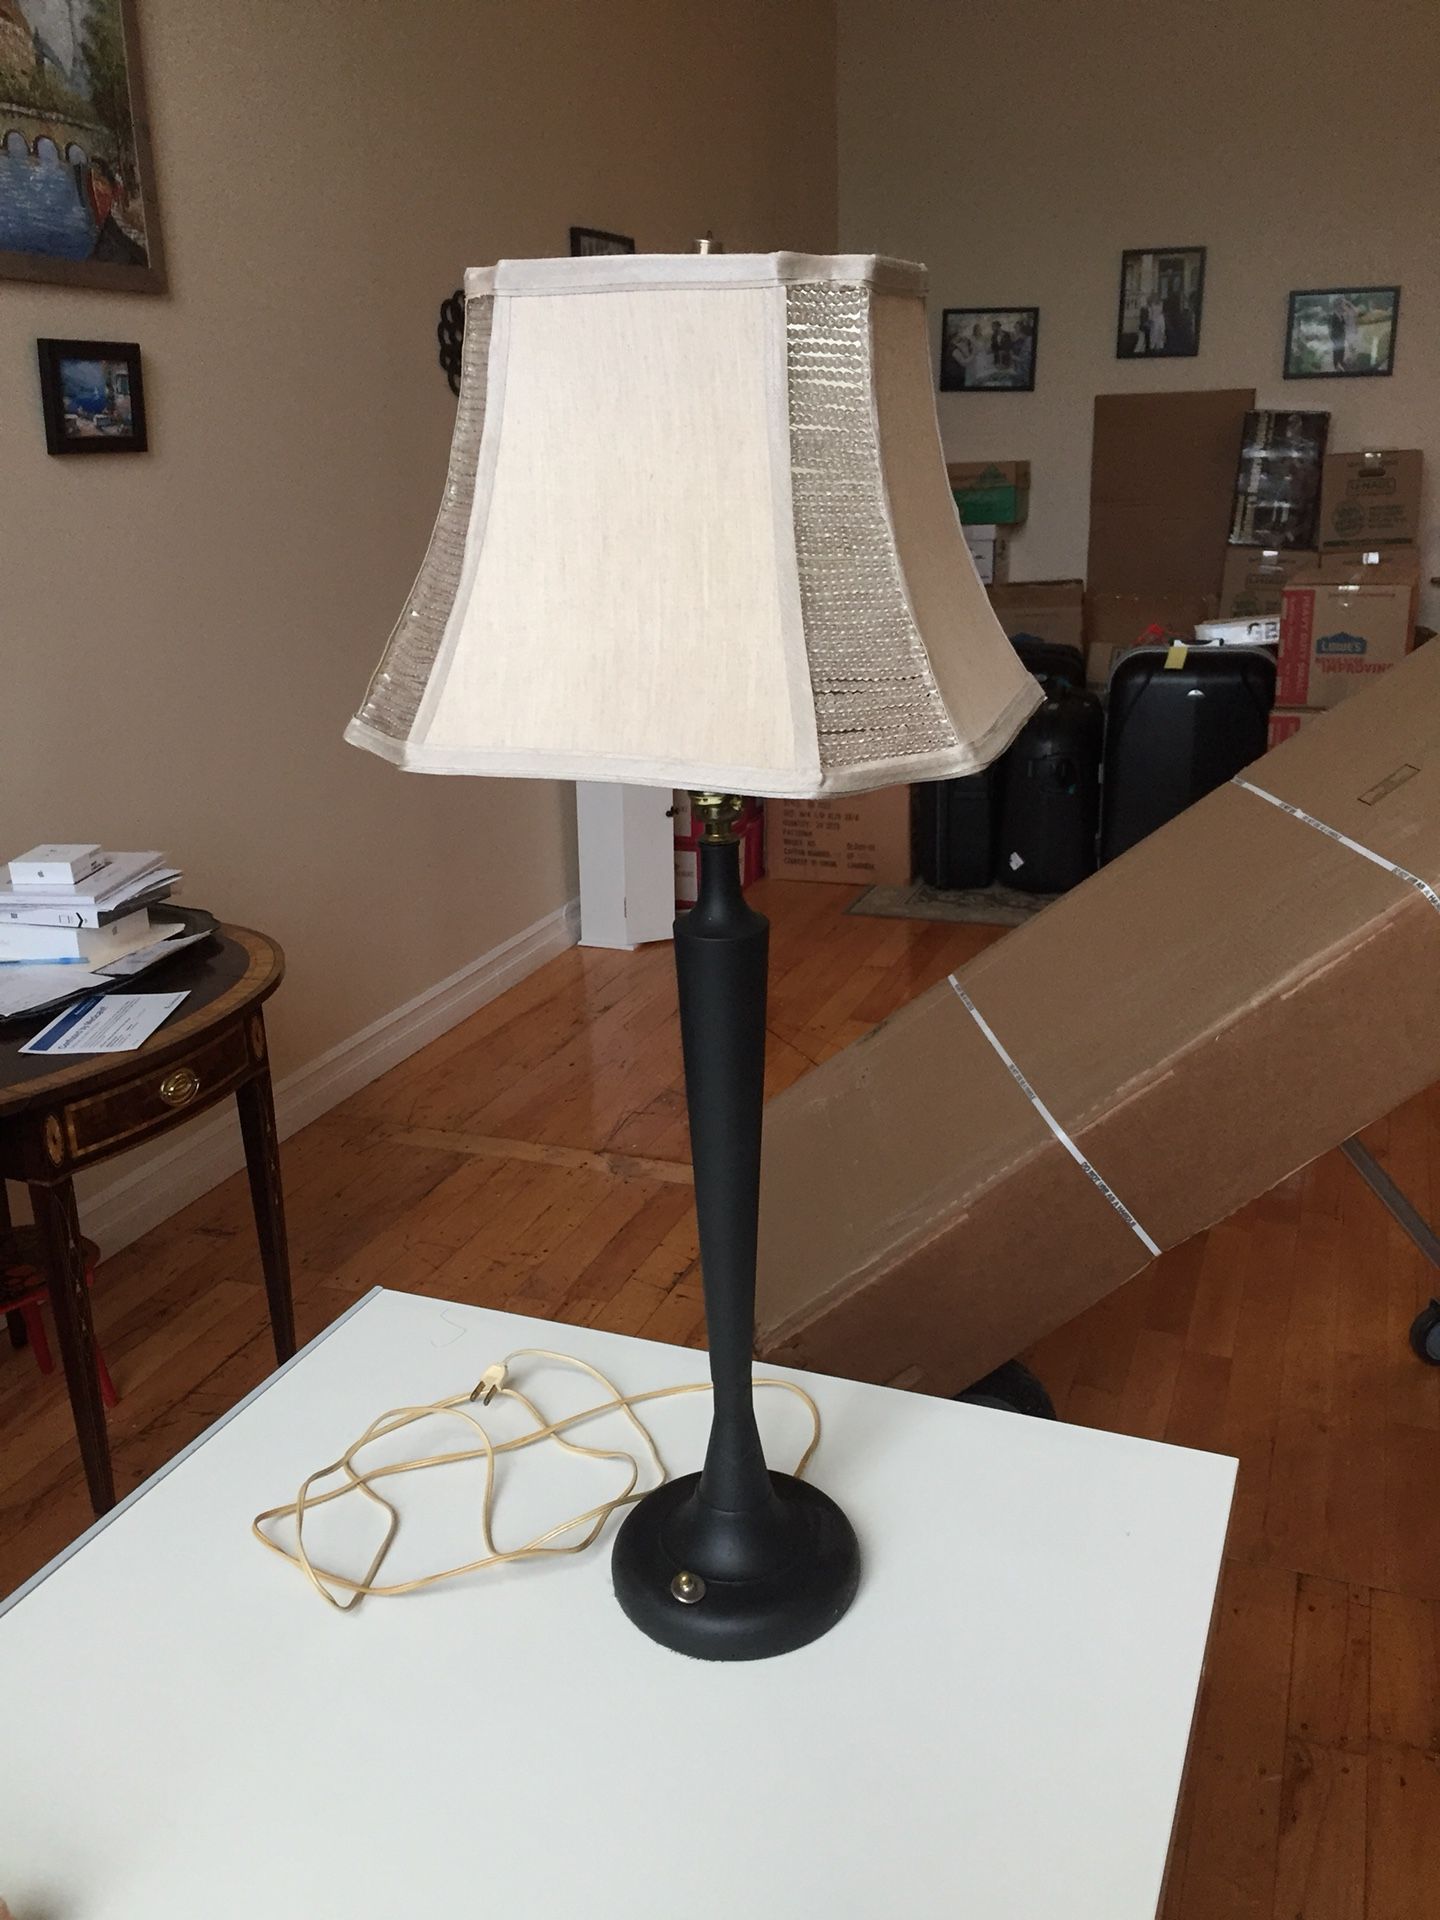 Antique Lamp. Classic style. Brass. Excellent condition. 32.5inches tall.